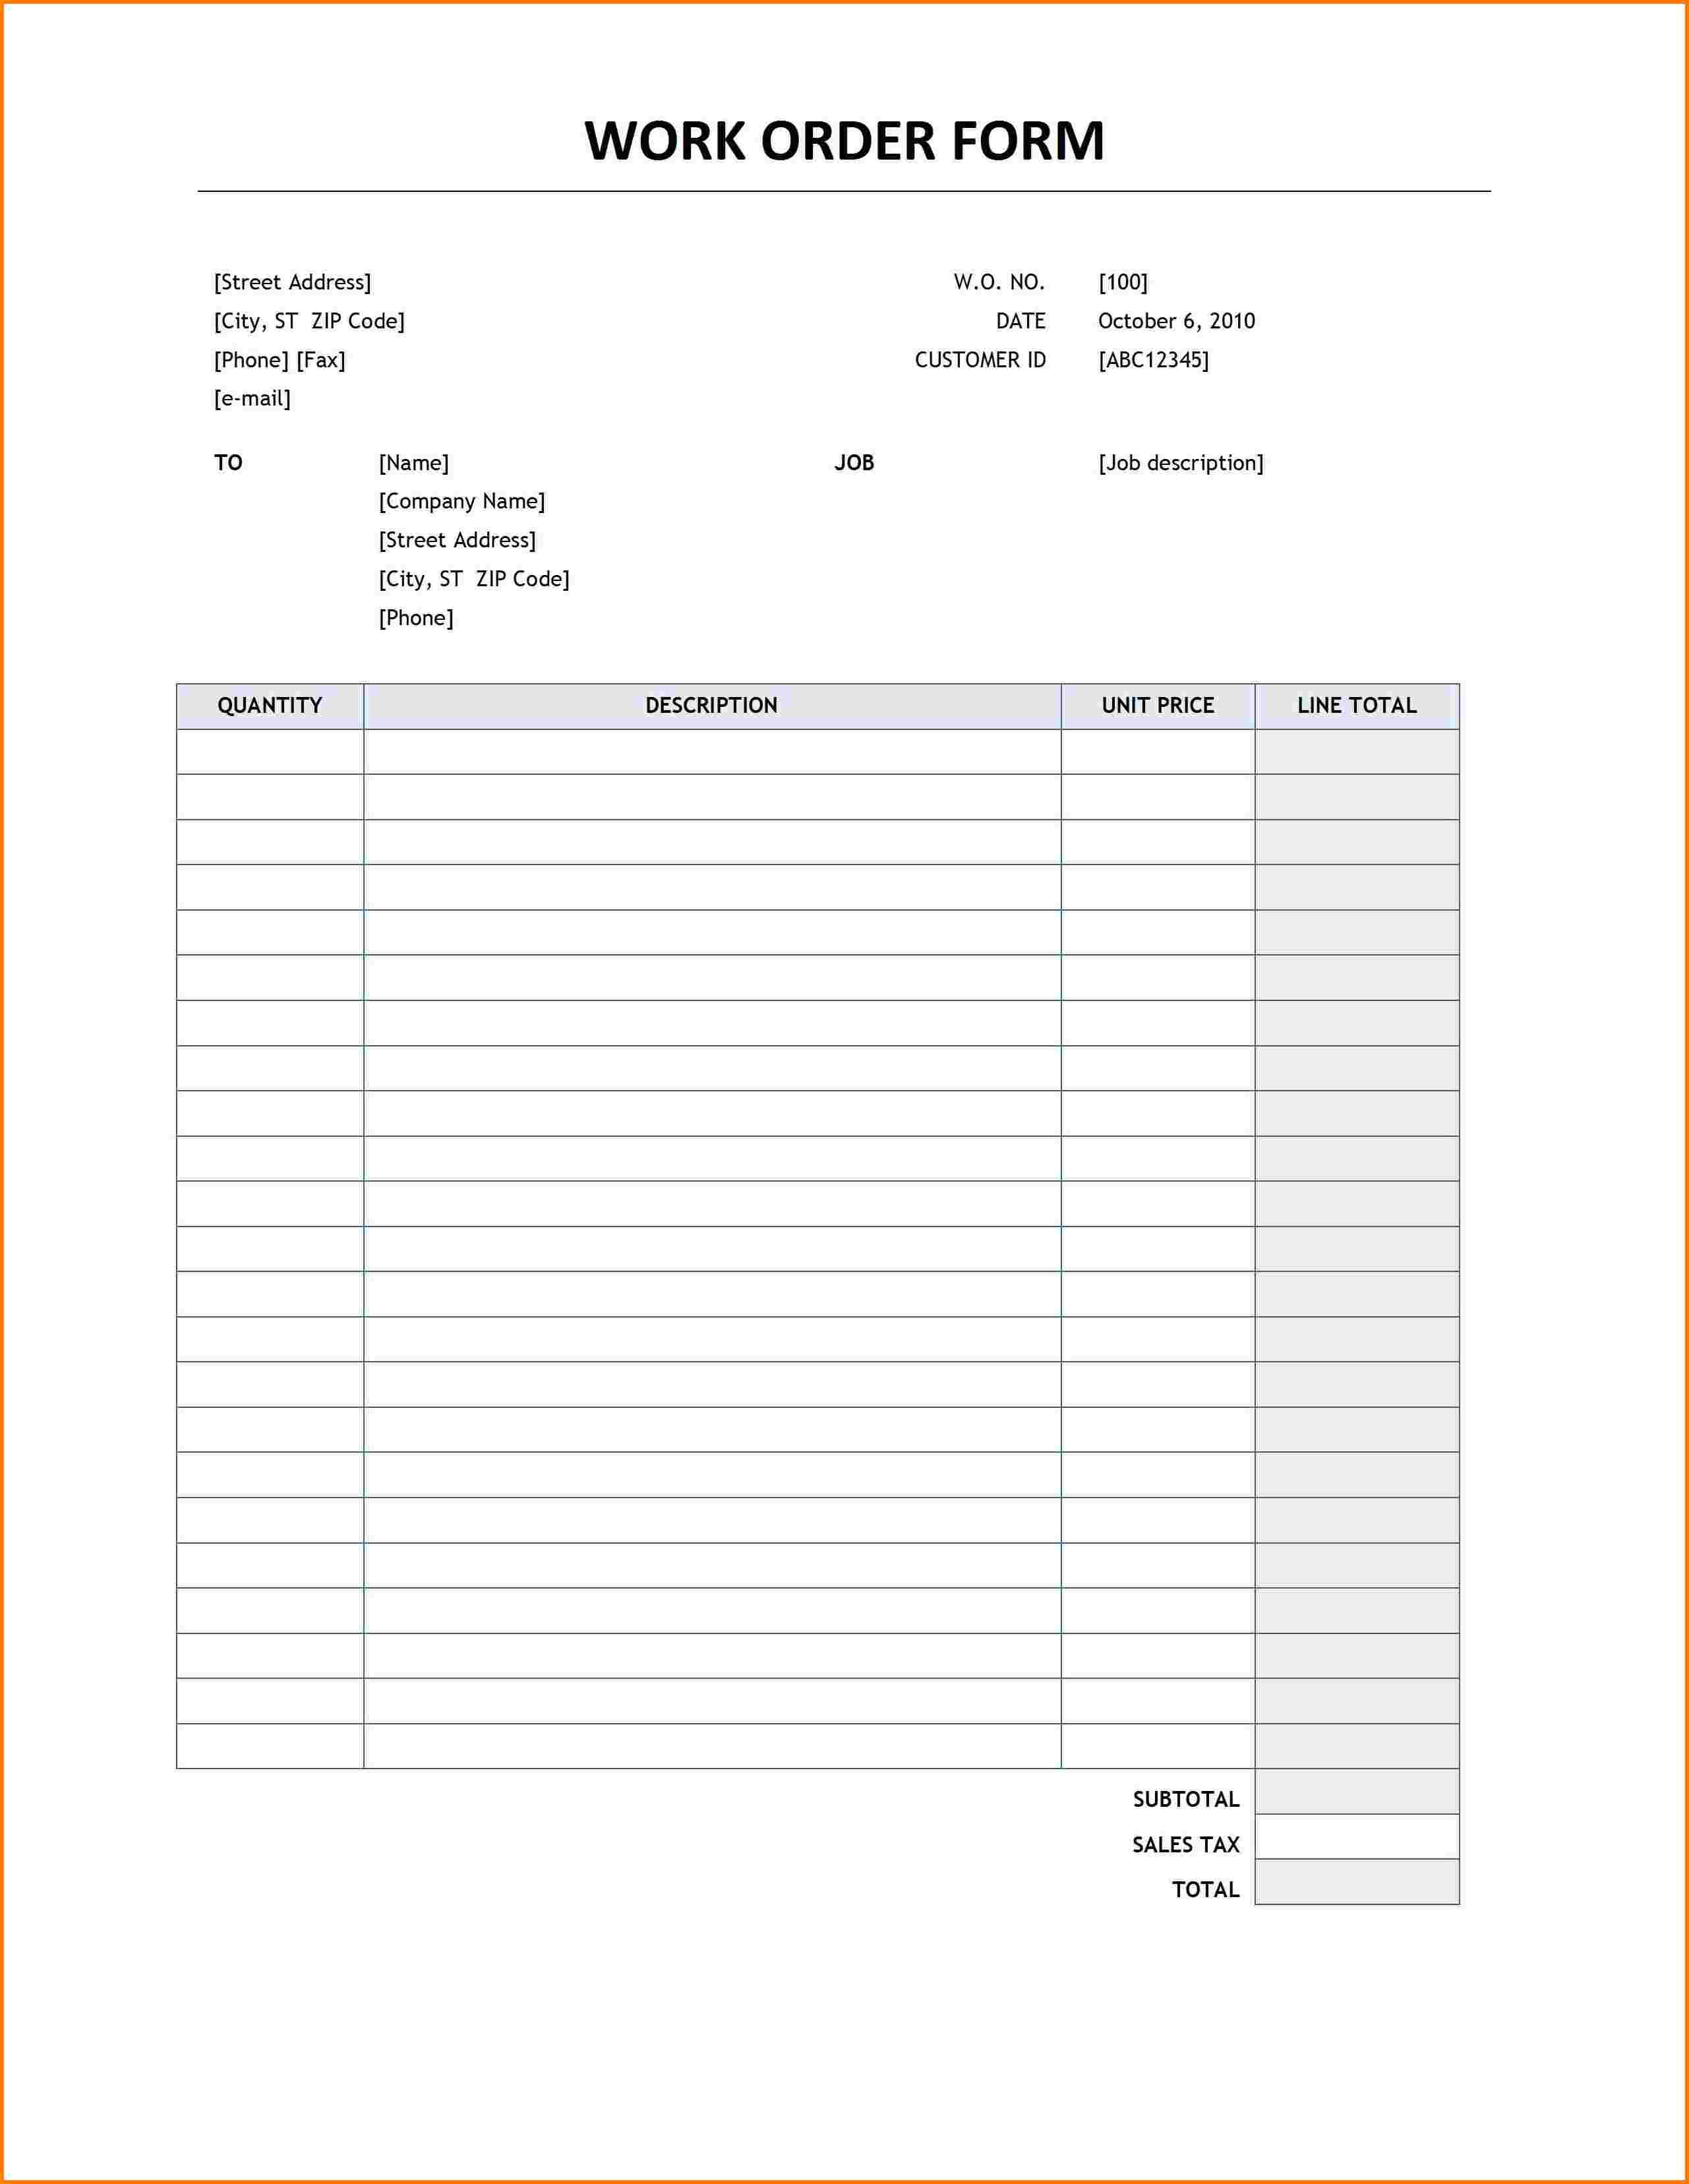 donation-receipt-letter-template-word-examples-letter-template-collection